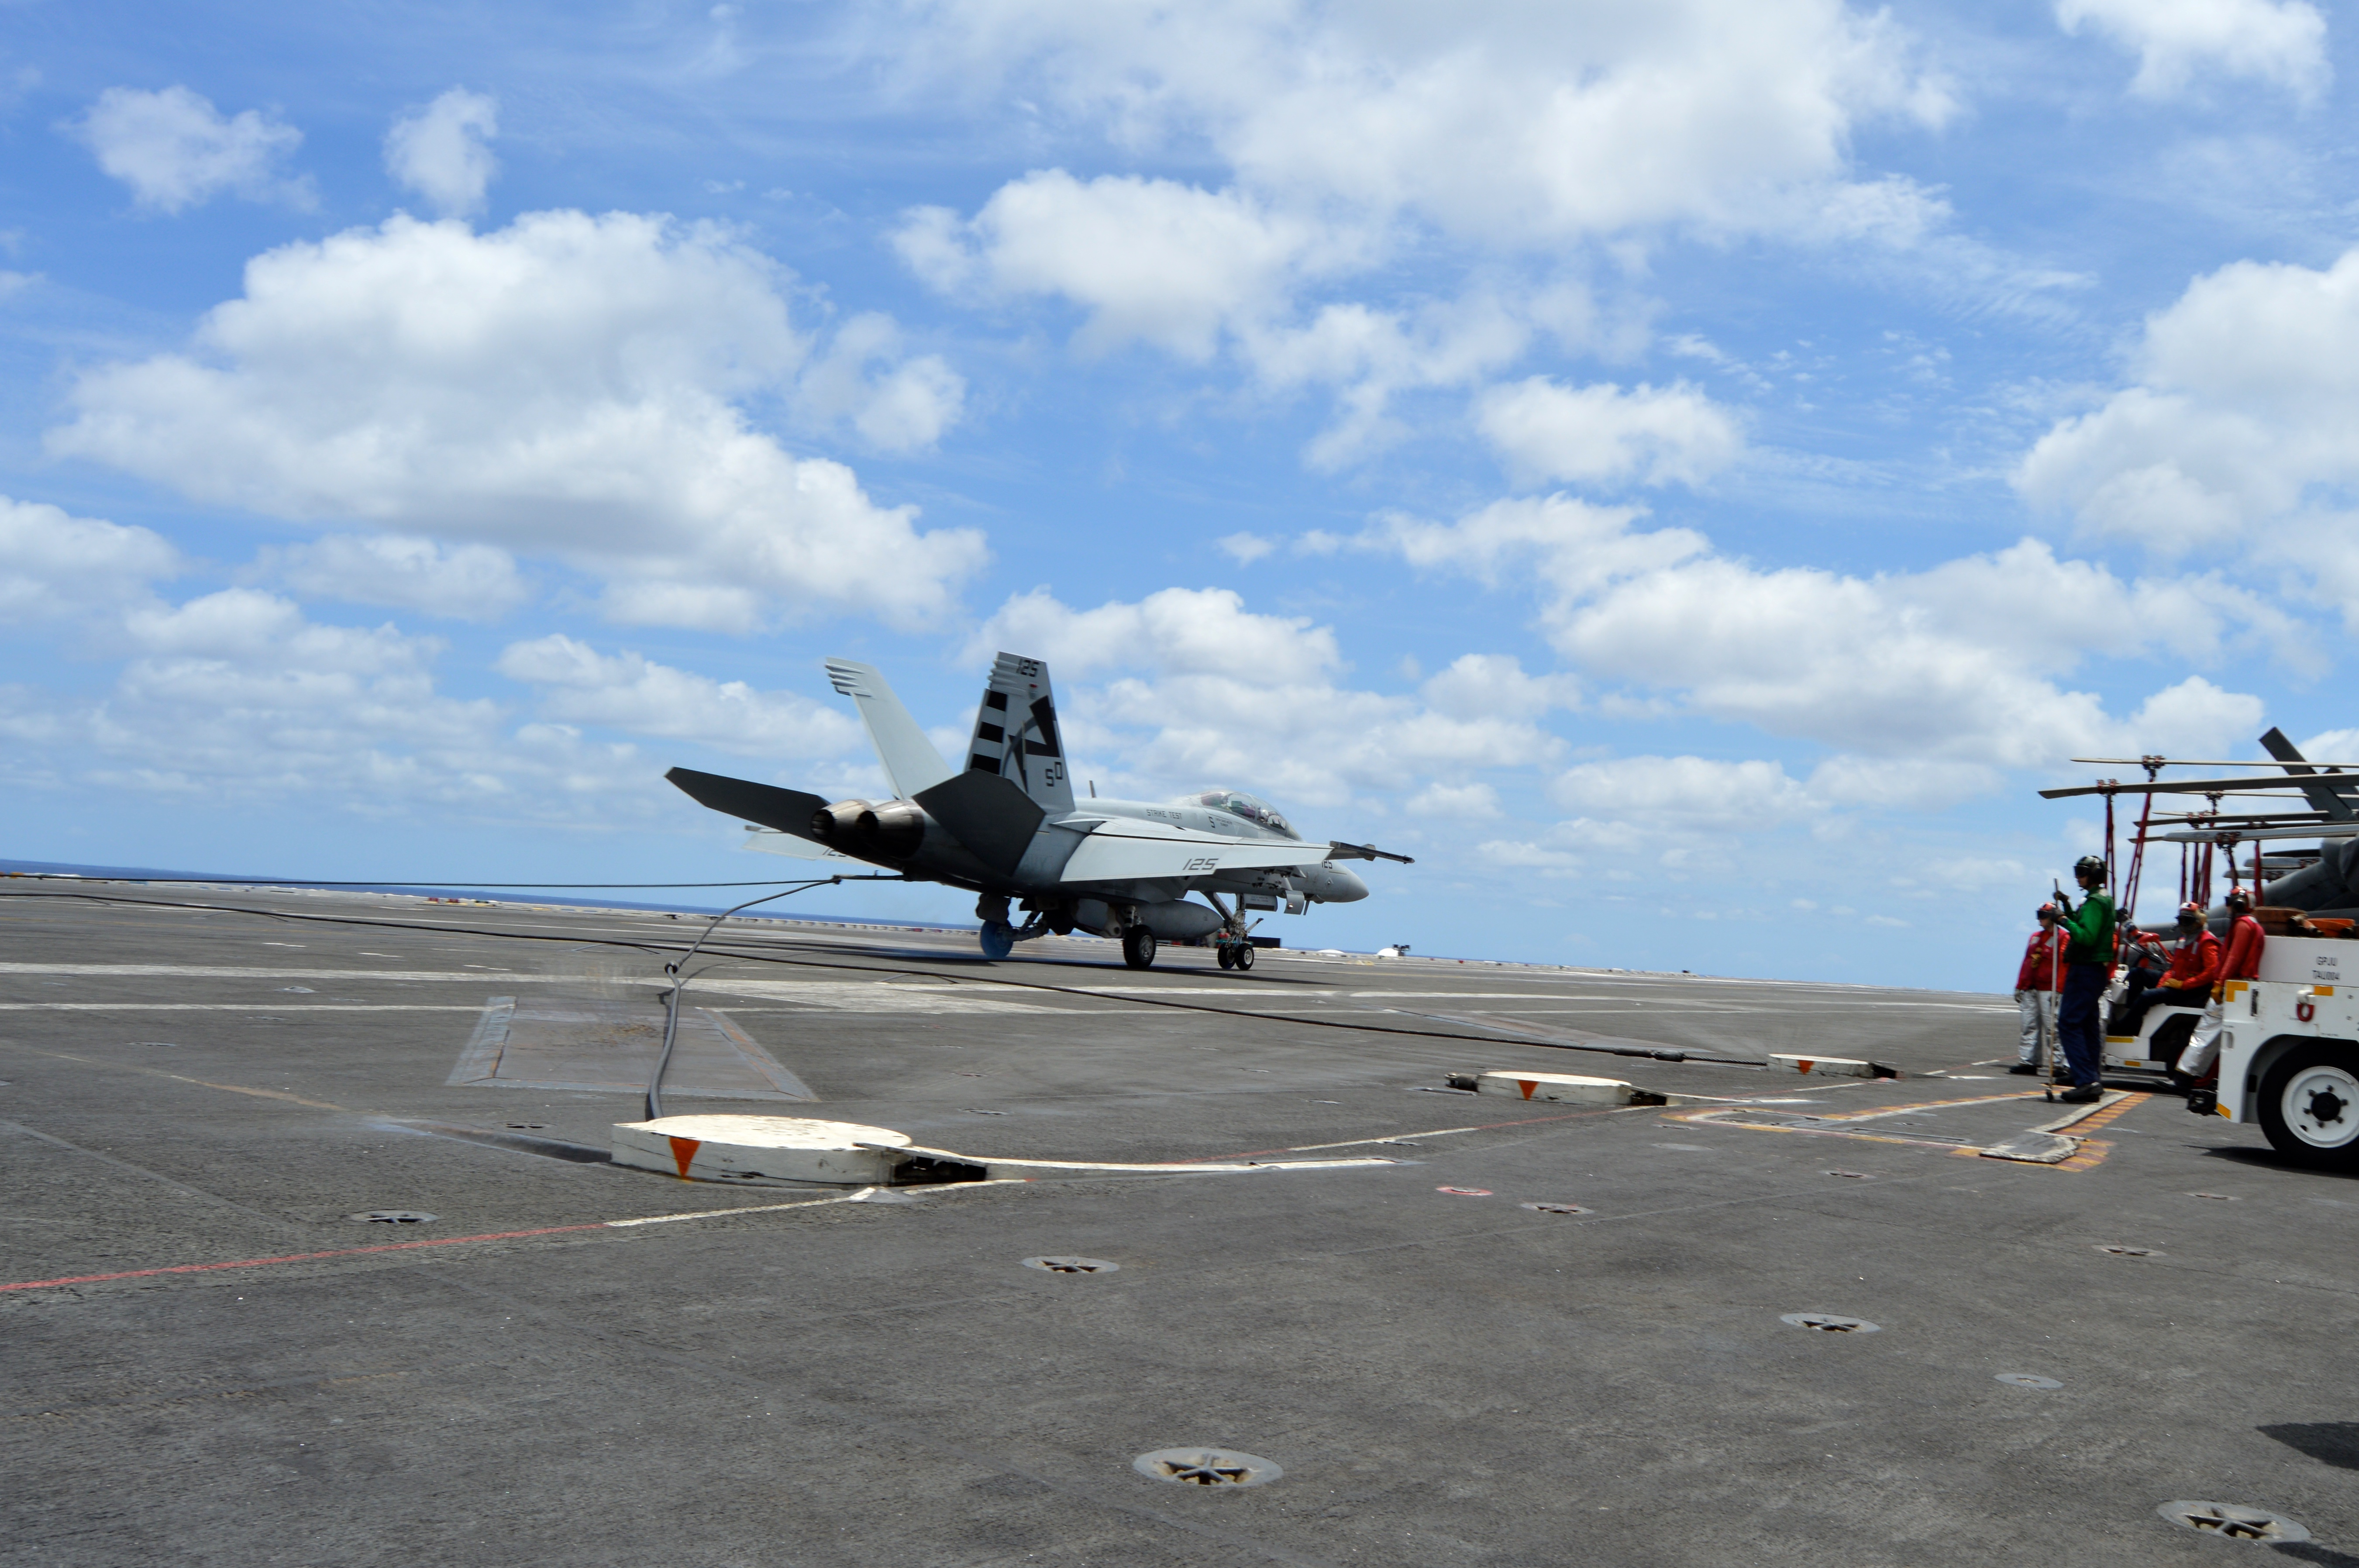 A F/A-18F Super Hornet catches the arresting gear wire while landing aboard USS George Washington (CVN-73) on June 27, 2016, while testing the MAGIC CARPET carrier landing assistance technology. USNI News photo.